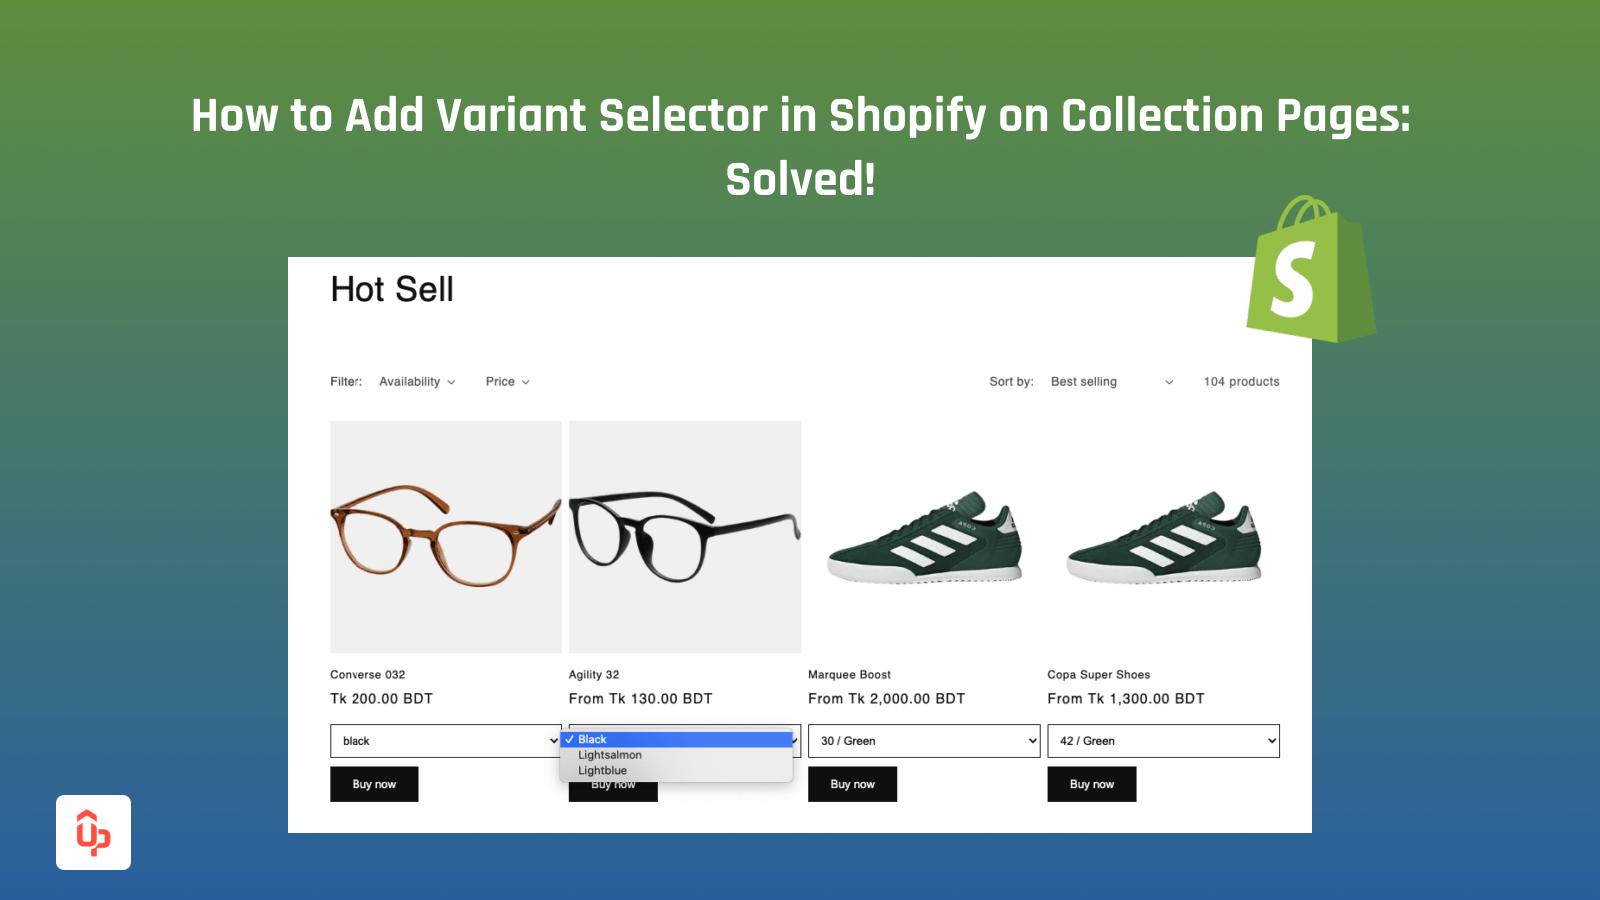 How to add variant selector on Shopify Collection Pages